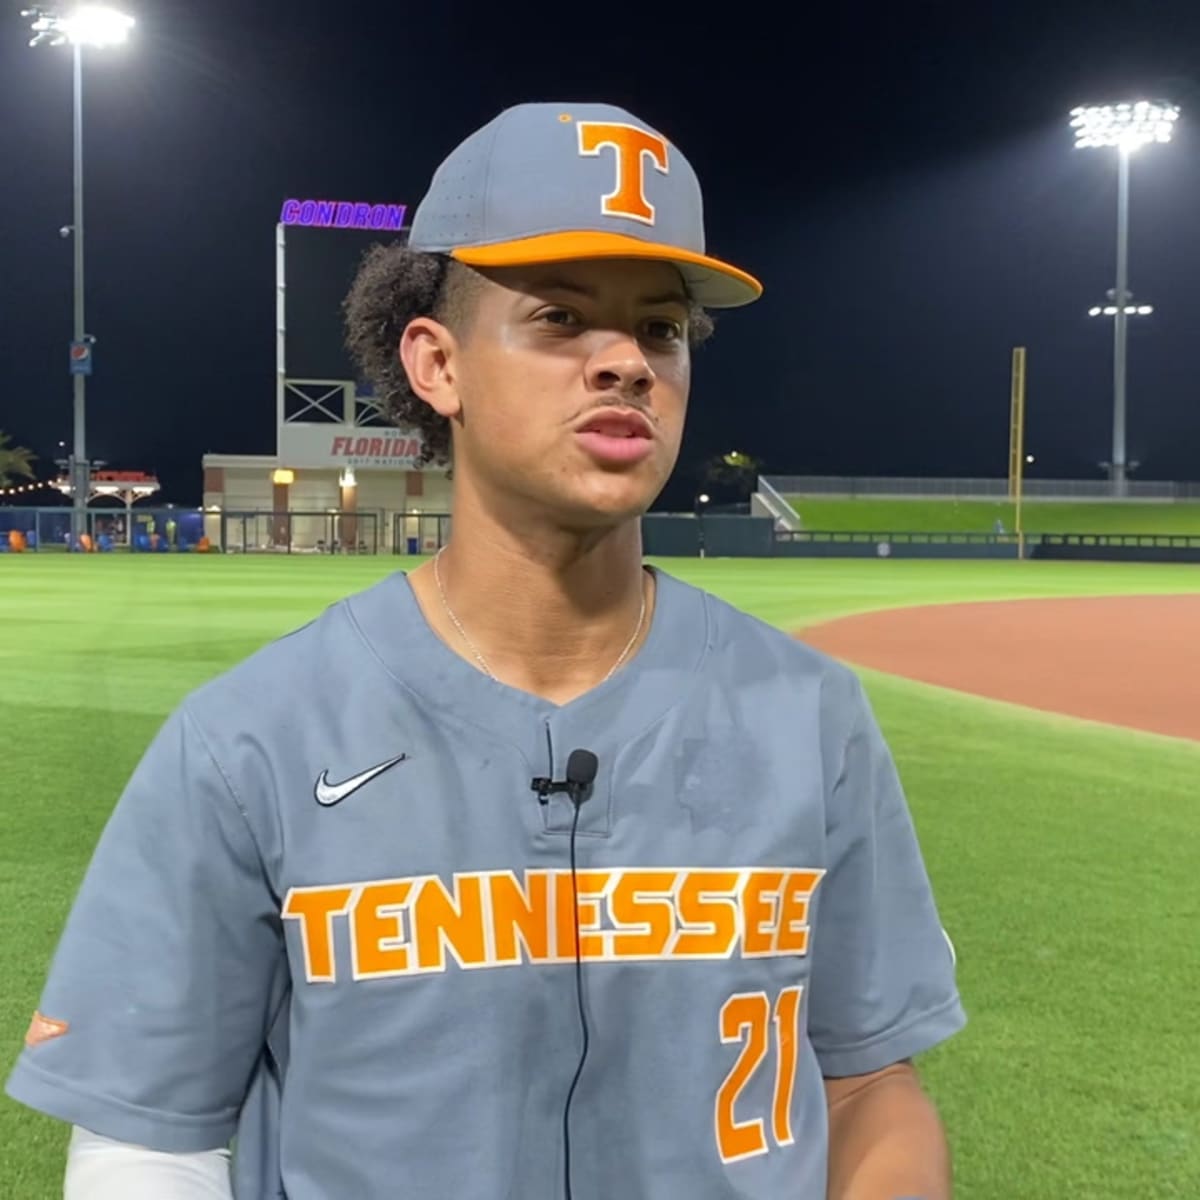 One year after his 'worst baseball season,' Lipscomb pitcher Logan Van  Treeck on cusp of MLB Draft selection - Main Street Media of Tennessee